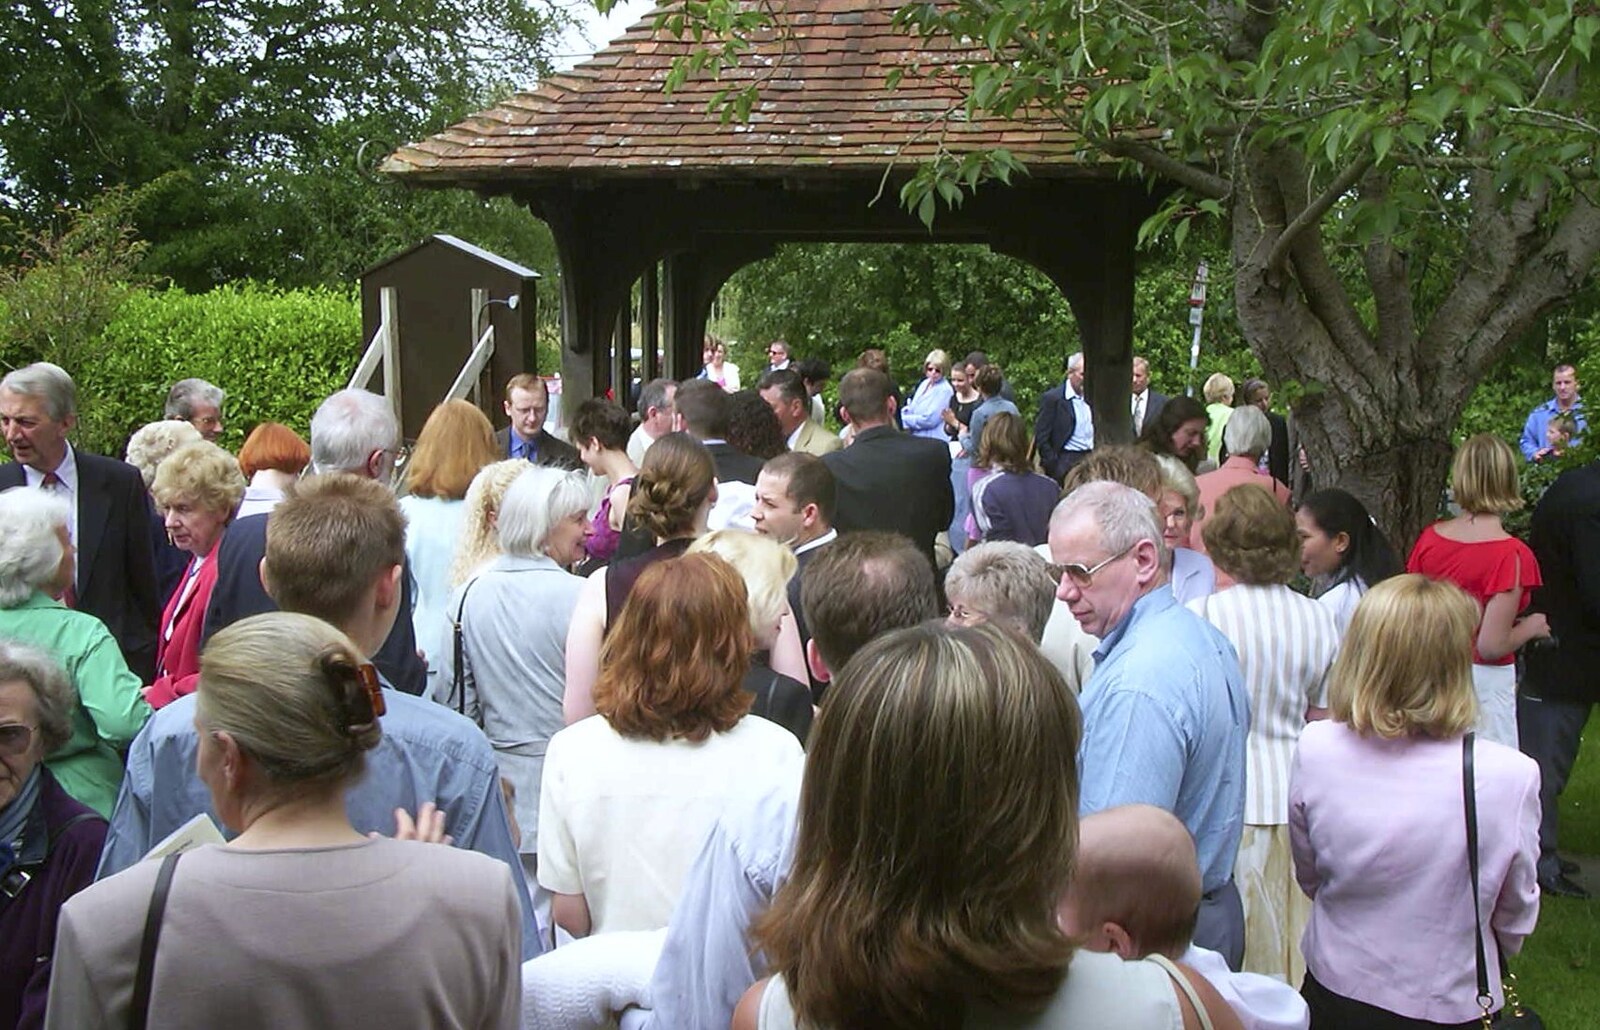 Crowds outside the church from Sydney's Christening, Hordle, Hampshire - 4th May 2002